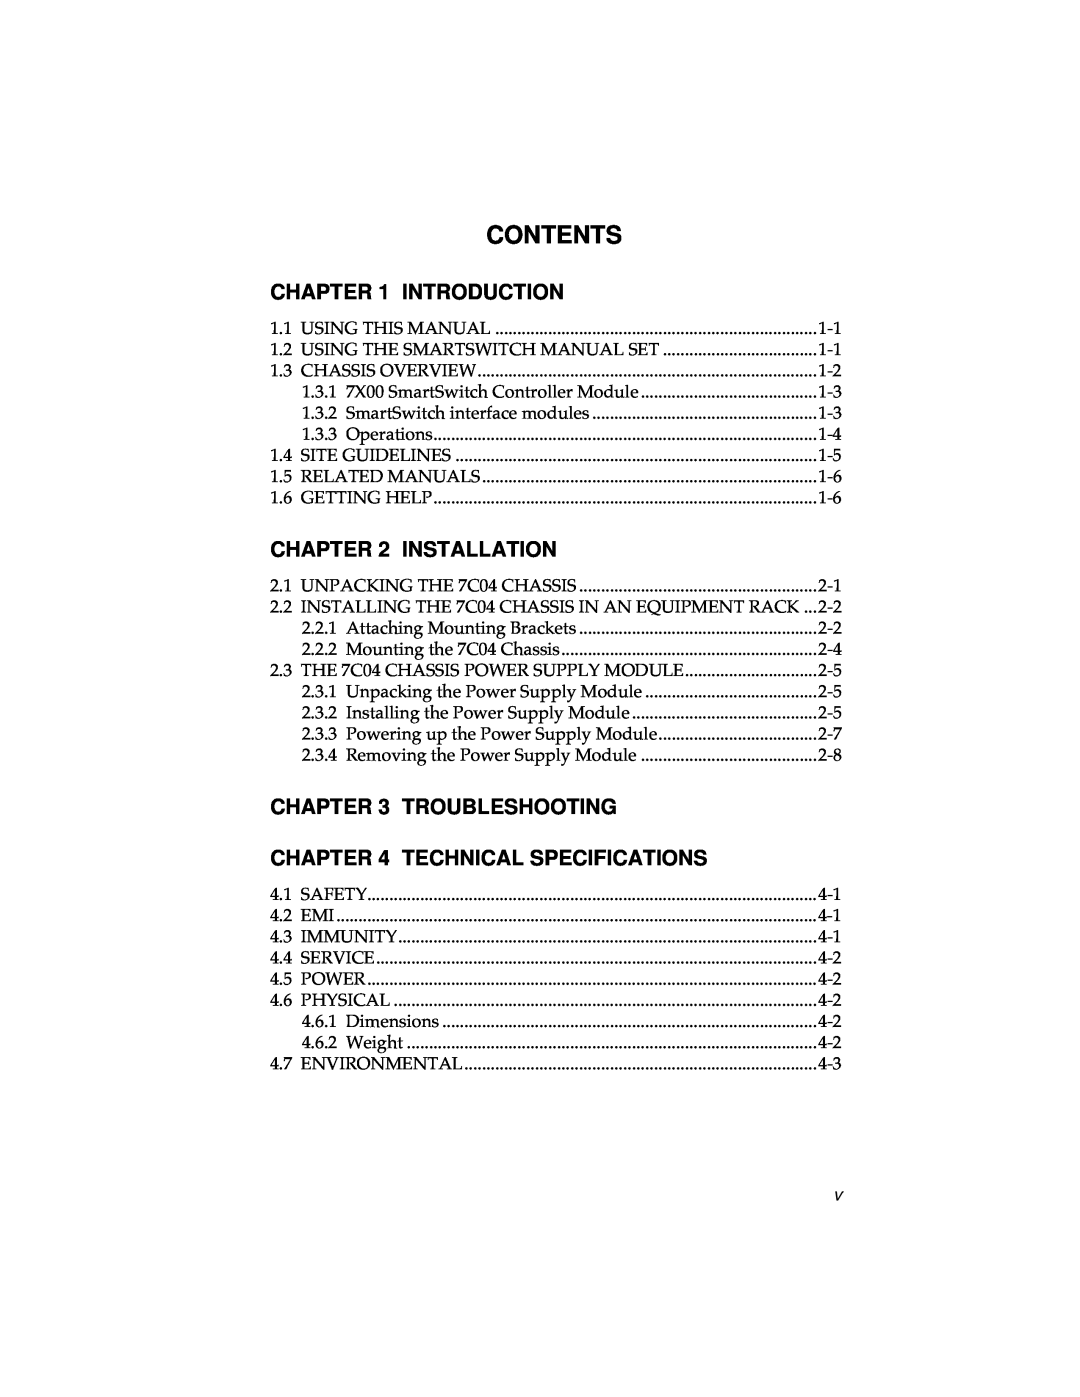 Cabletron Systems 7C04 Workgroup manual Contents, Introduction, Installation, Troubleshooting Technical Specifications 